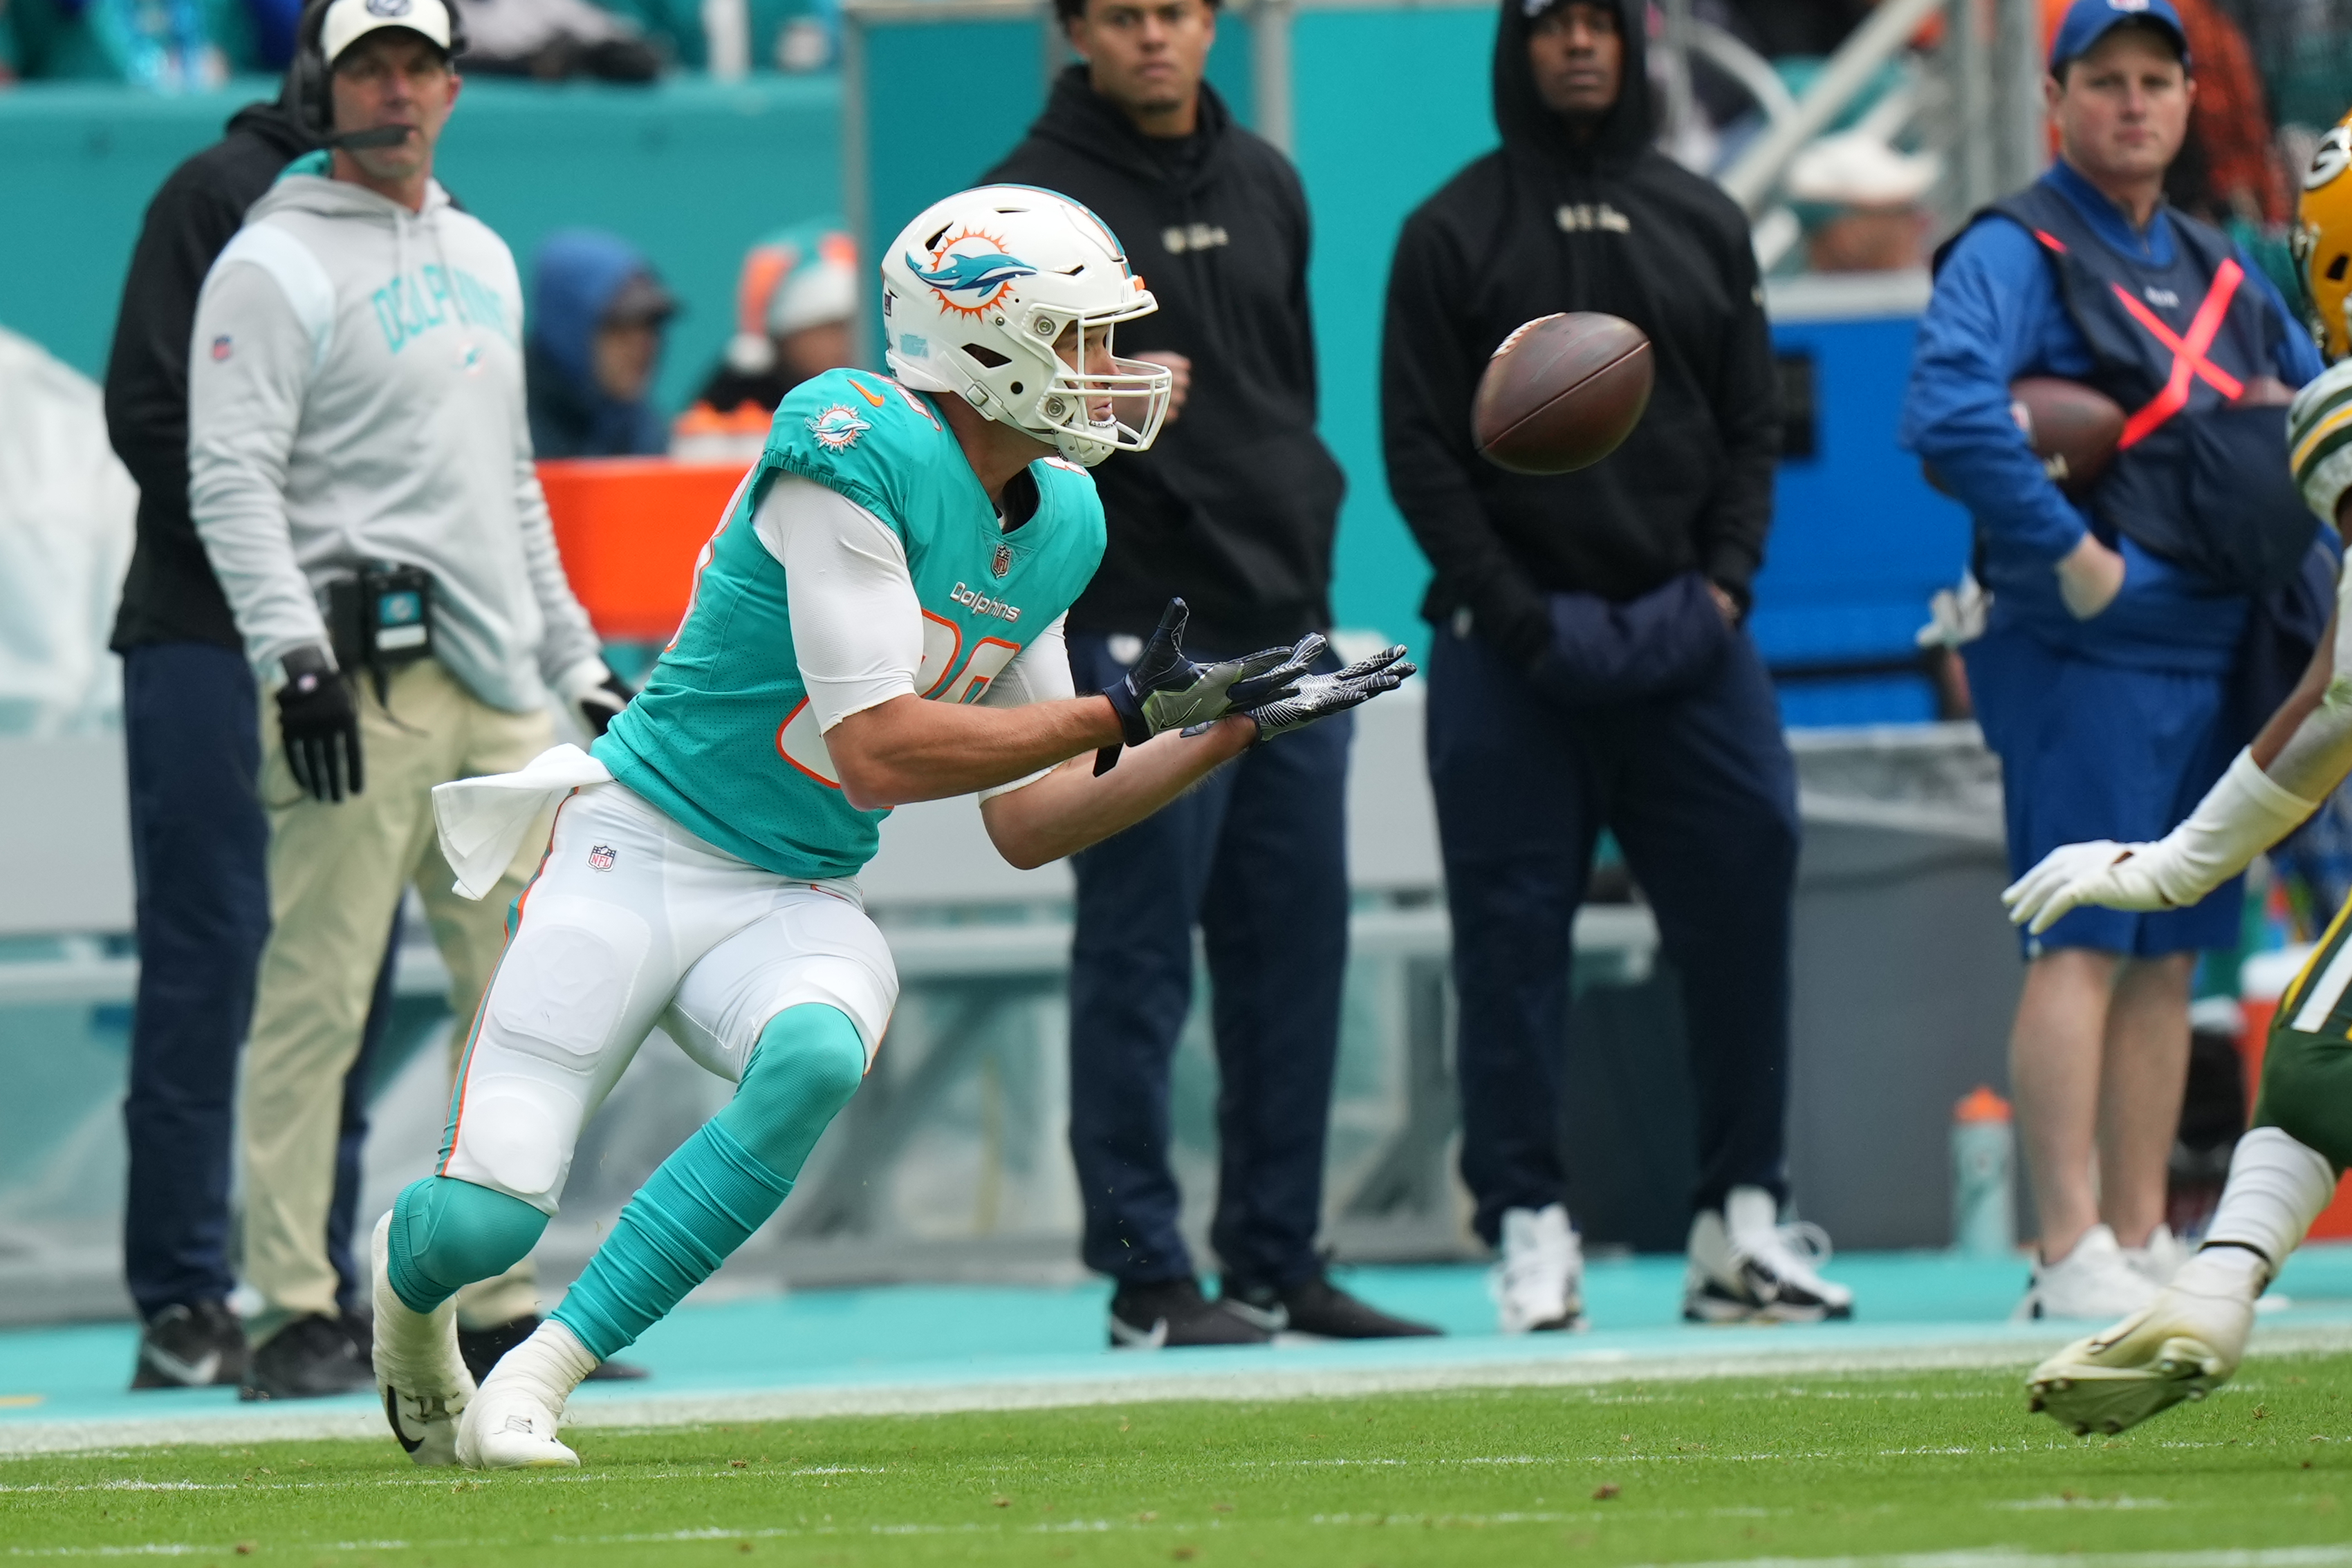 NFL: DEC 25 Packers at Dolphins